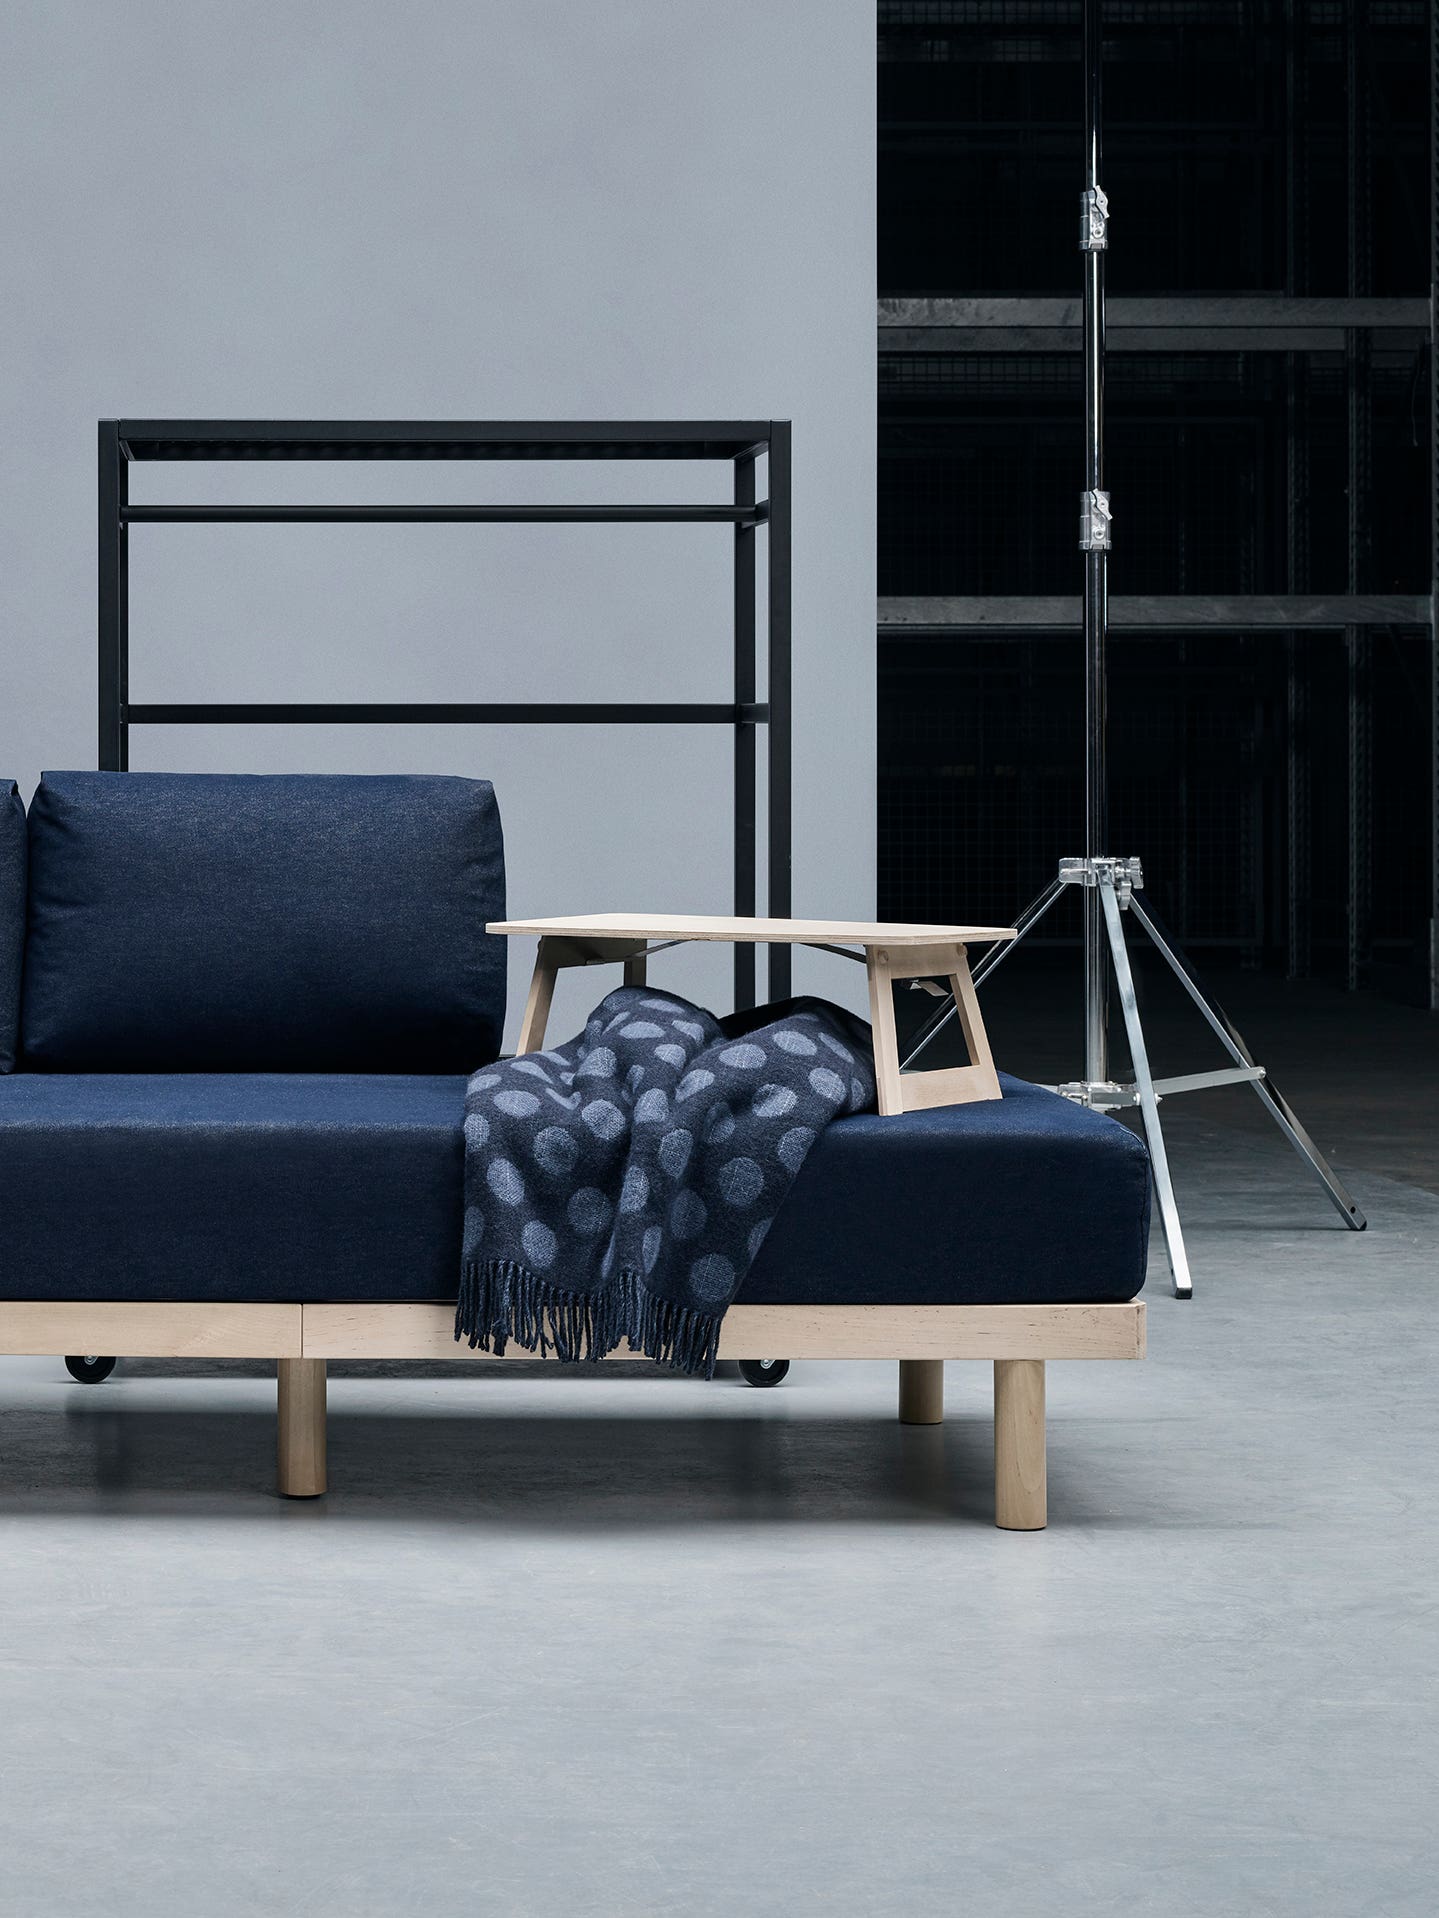 IKEA Has Announced 26 Fresh Collections—These Are the 3 We’re Dying to See